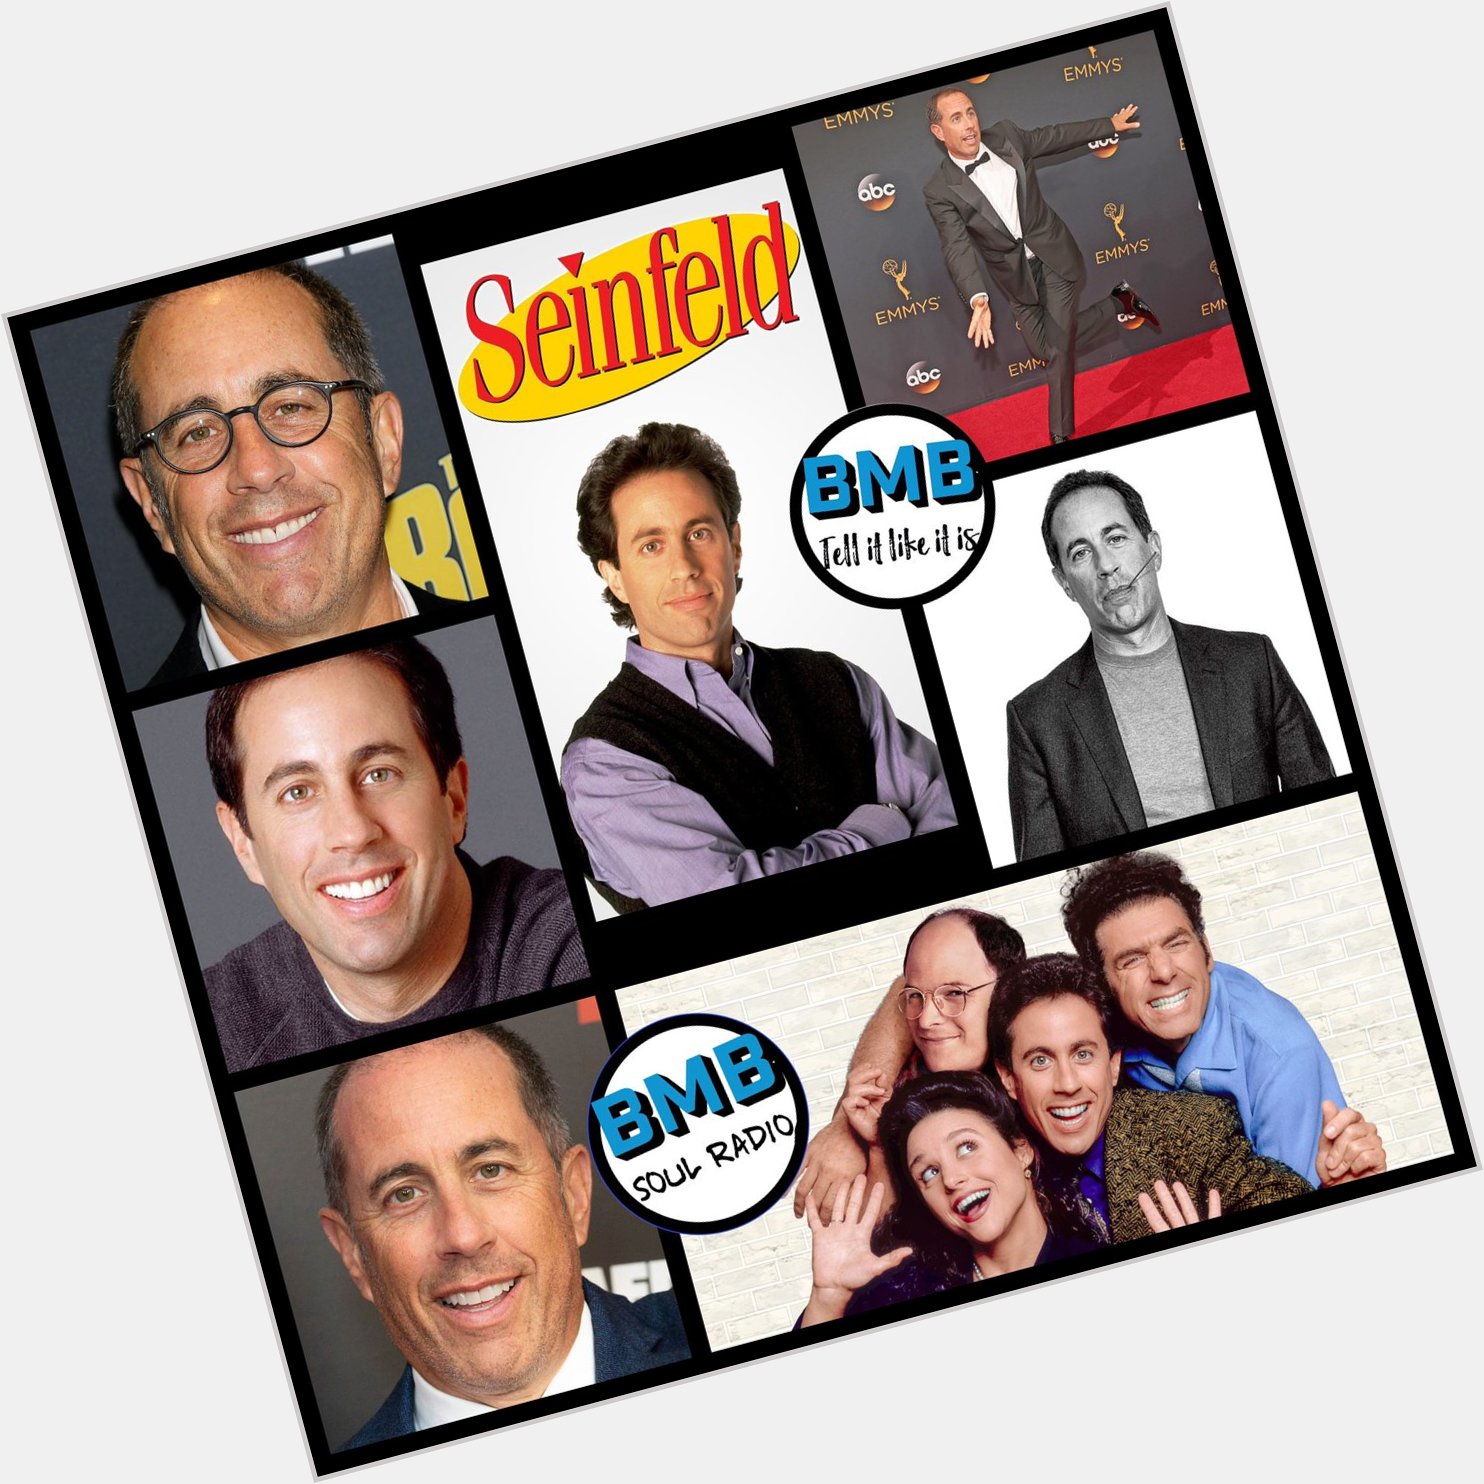      Happy Birthday To The Legendary Jerry Seinfeld! He Is 68 Today!   